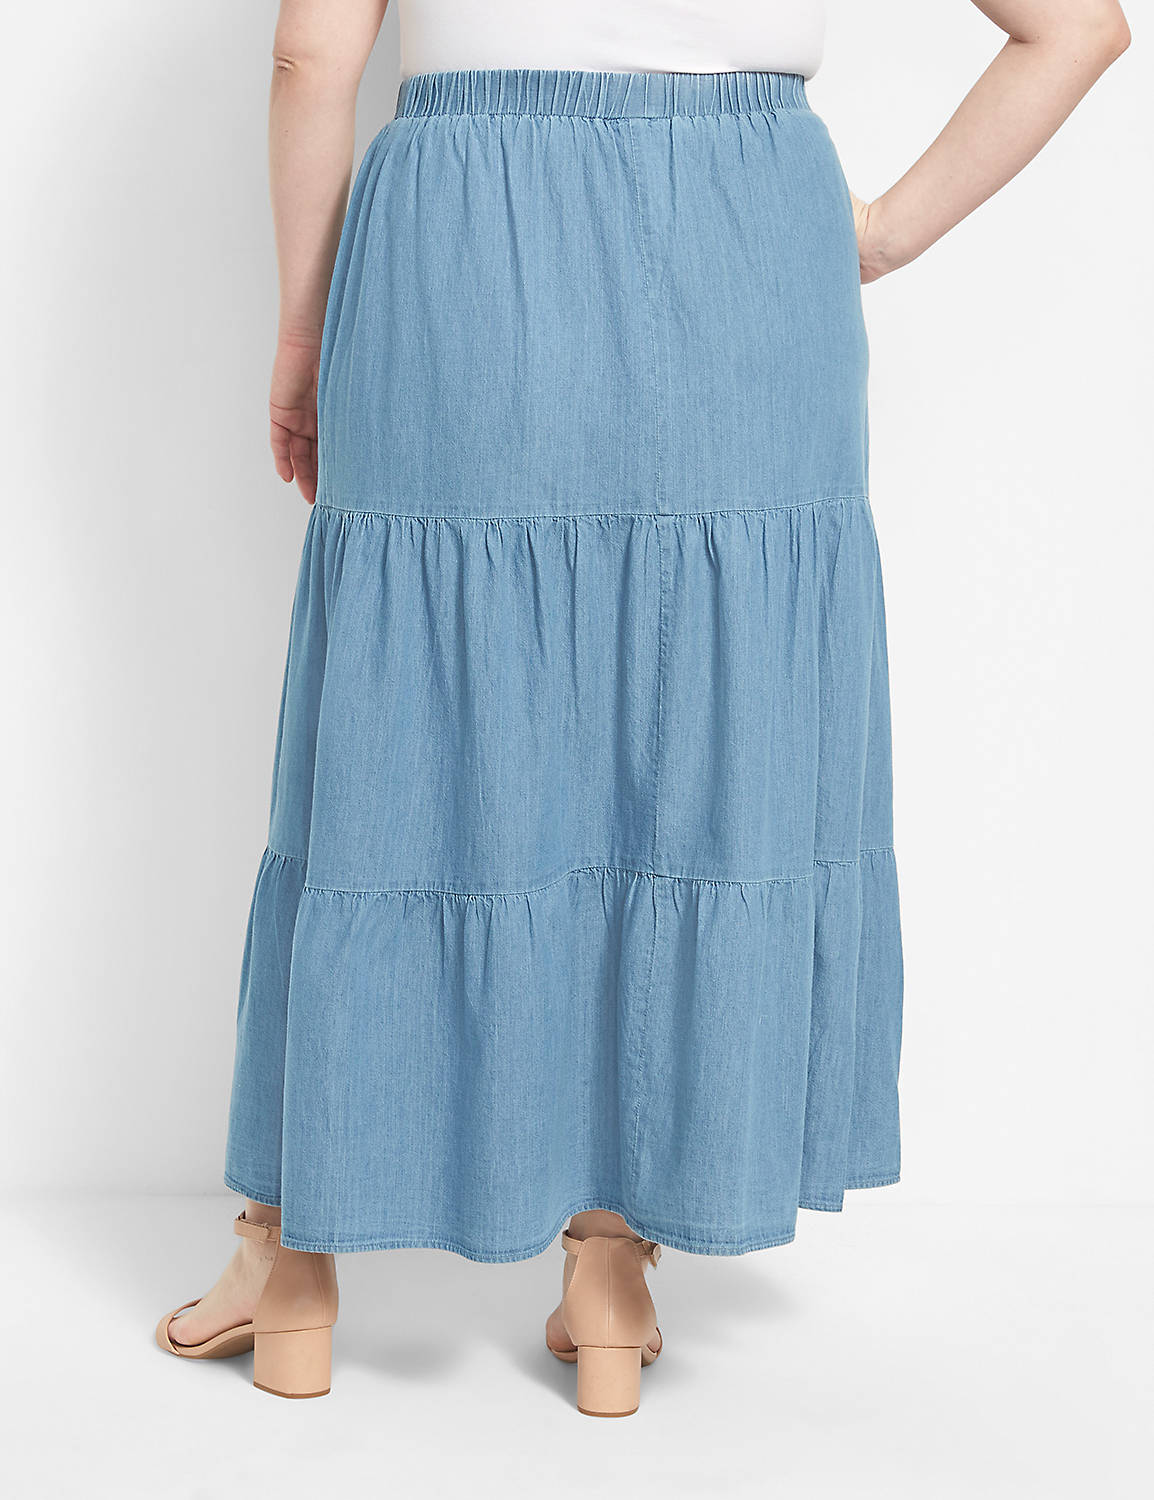 Chambray Tiered Maxi Skirt 1125418 Product Image 2